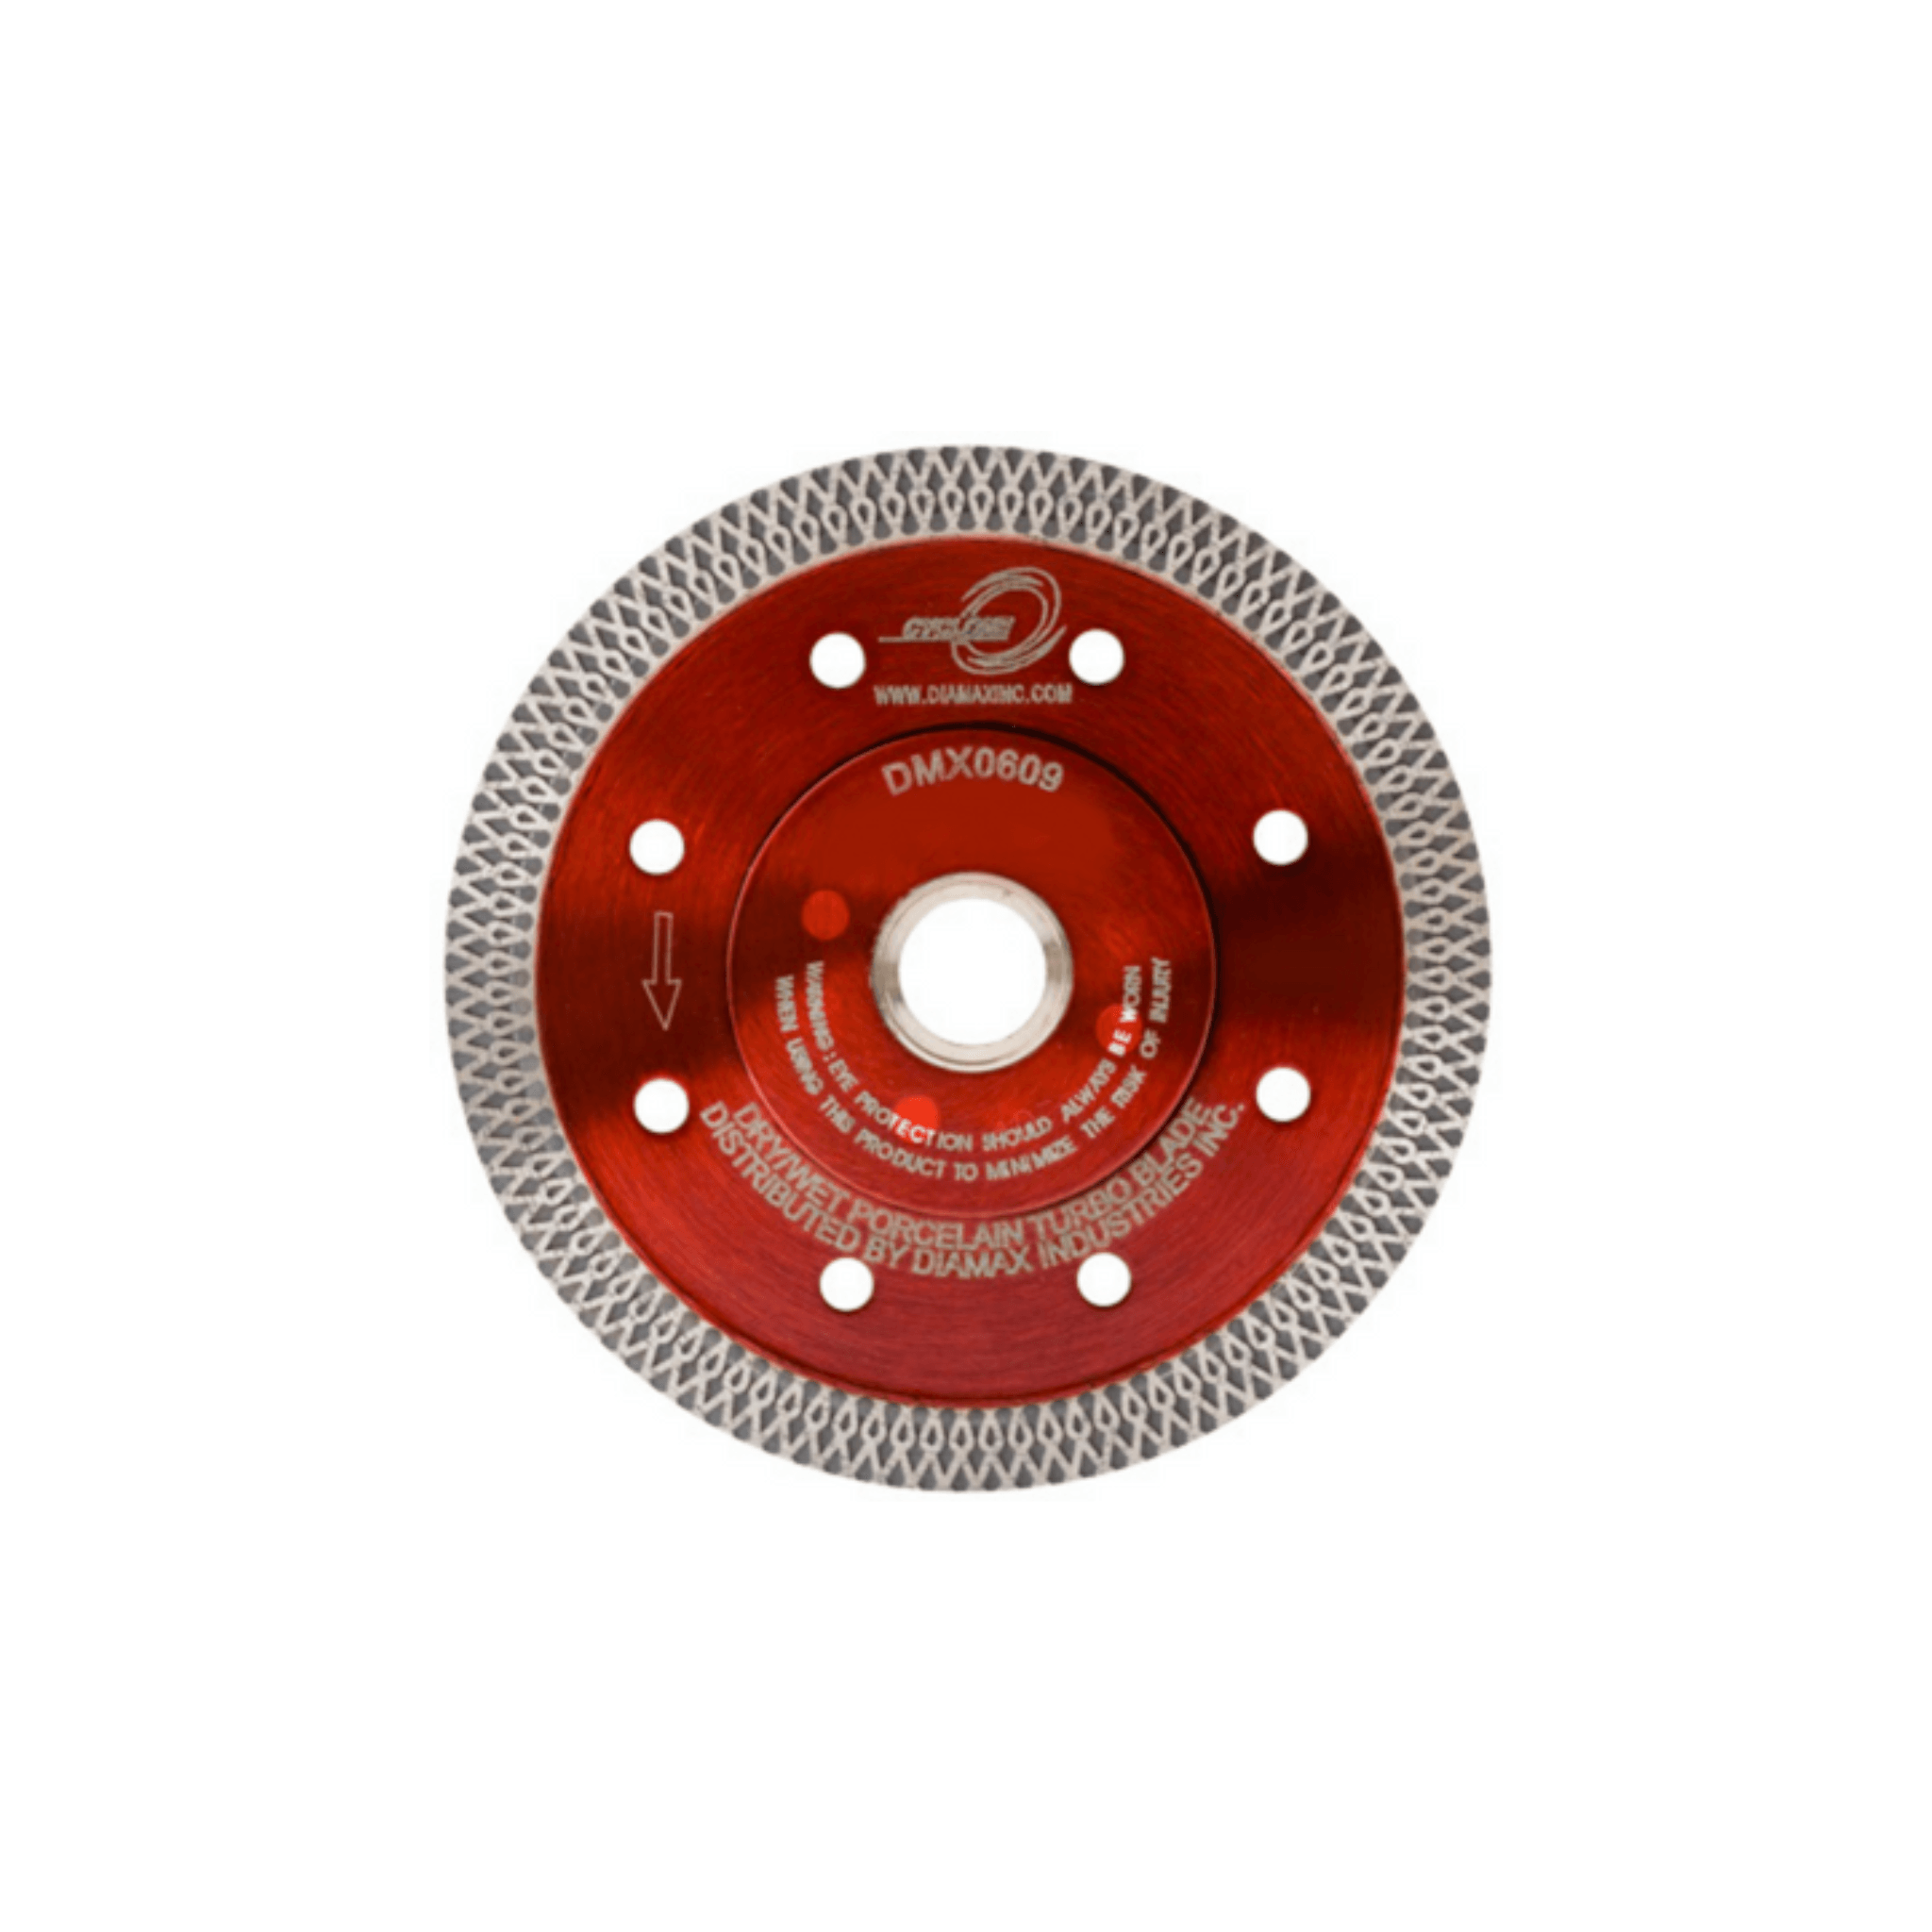 Cyclone Porcelain Turbo Blade 5" - Direct Stone Tool Supply, Inc